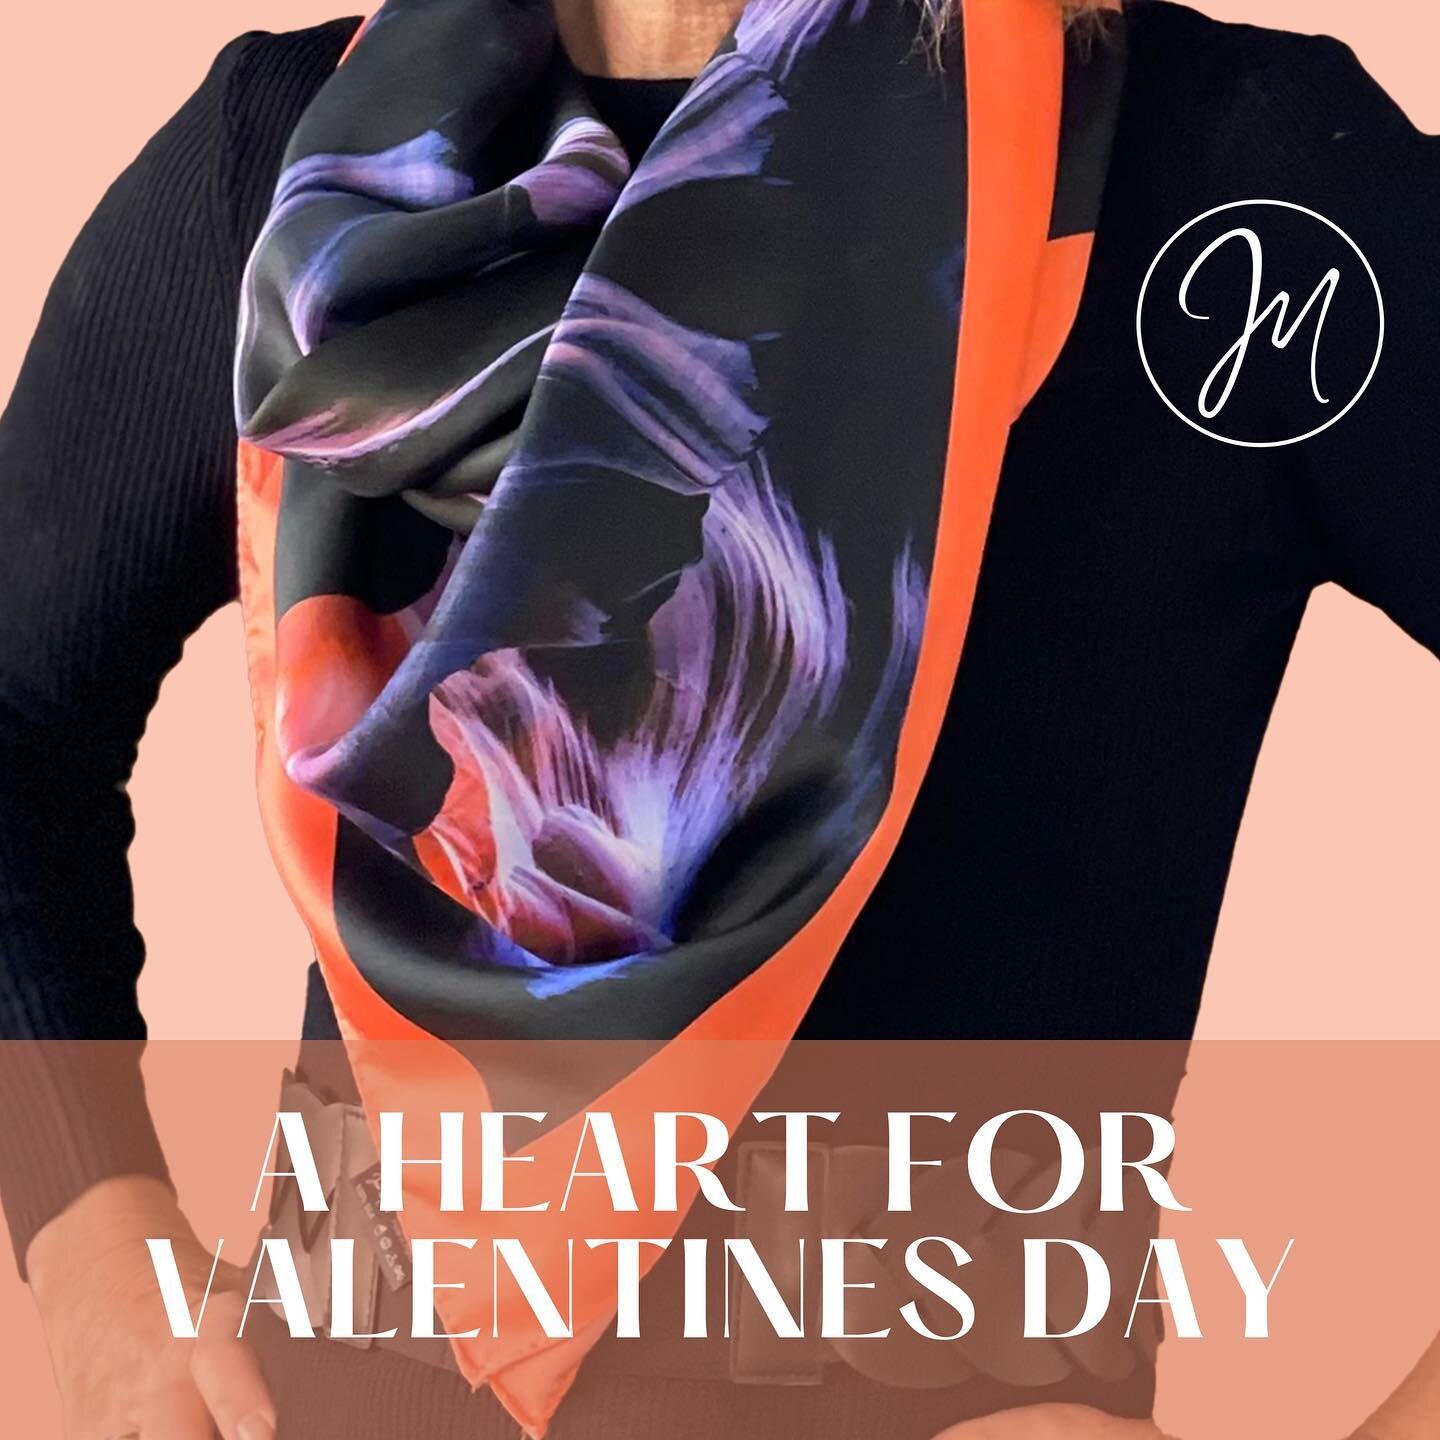 A heart for Valentine&rsquo;s Day from By Jean Michel&rsquo;s scarf 🧣Order for your loved one now at www.ByJeanMichel.com